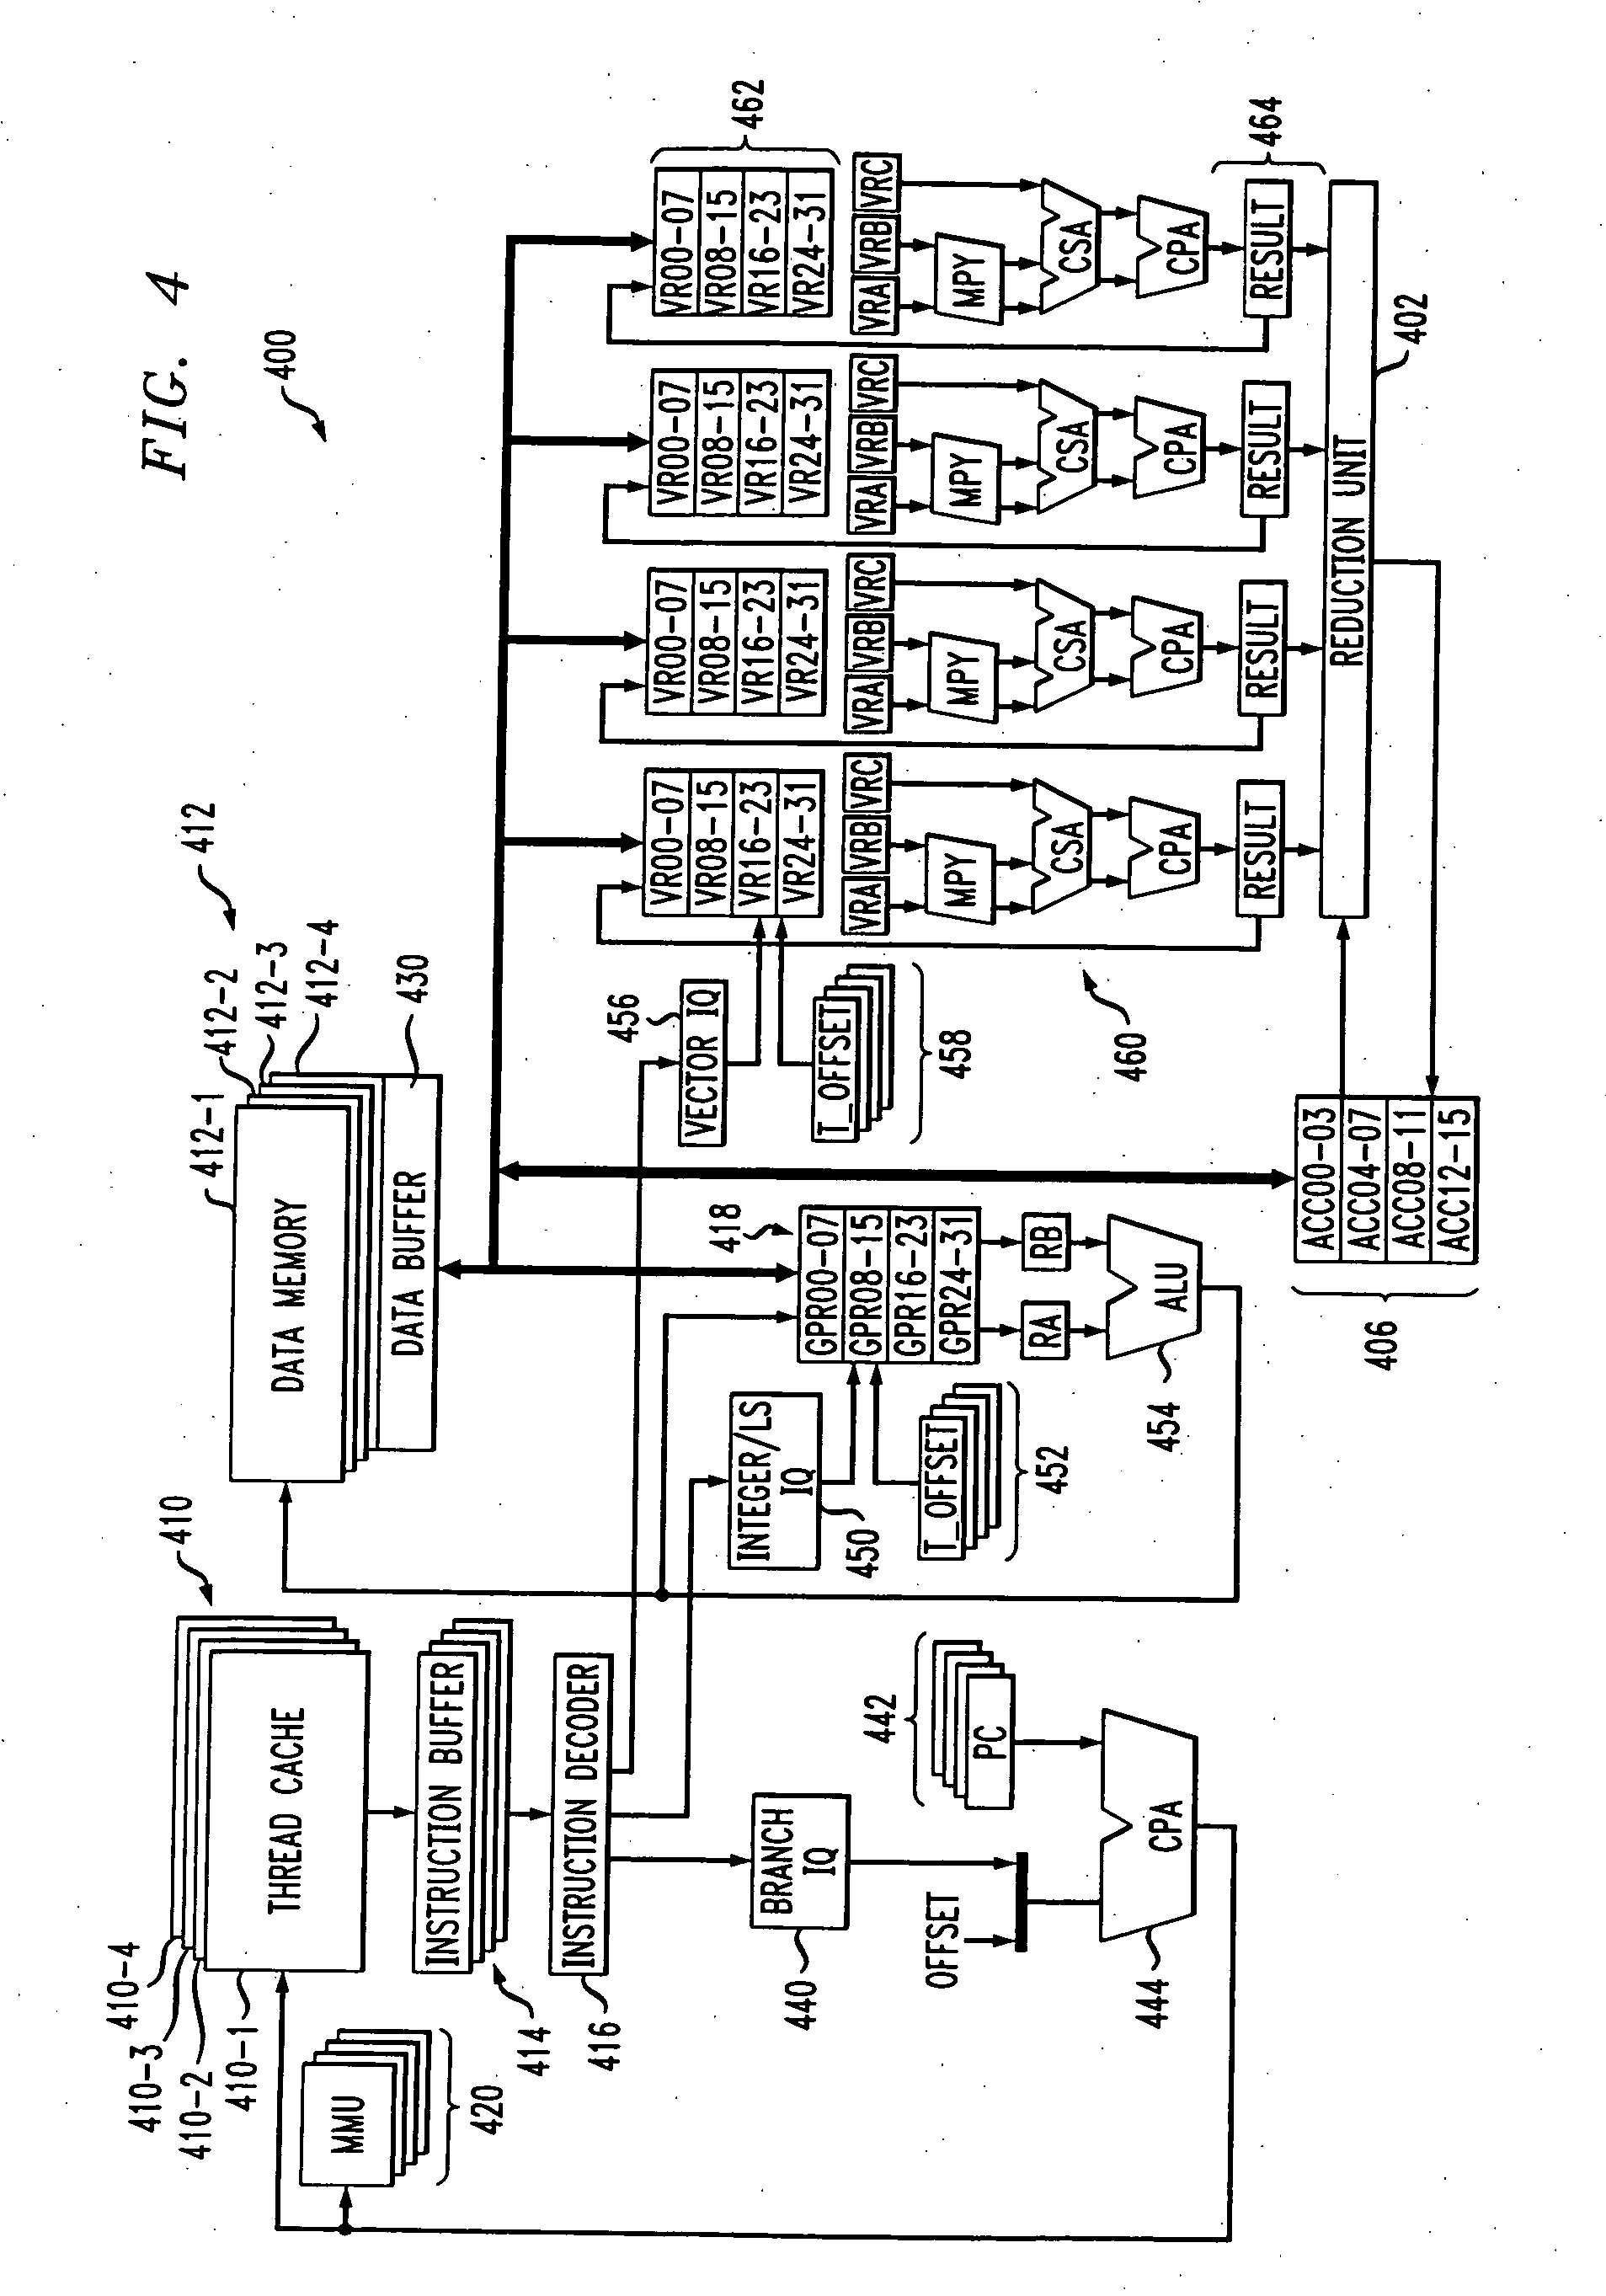 Multithreaded processor with multiple concurrent pipelines per thread